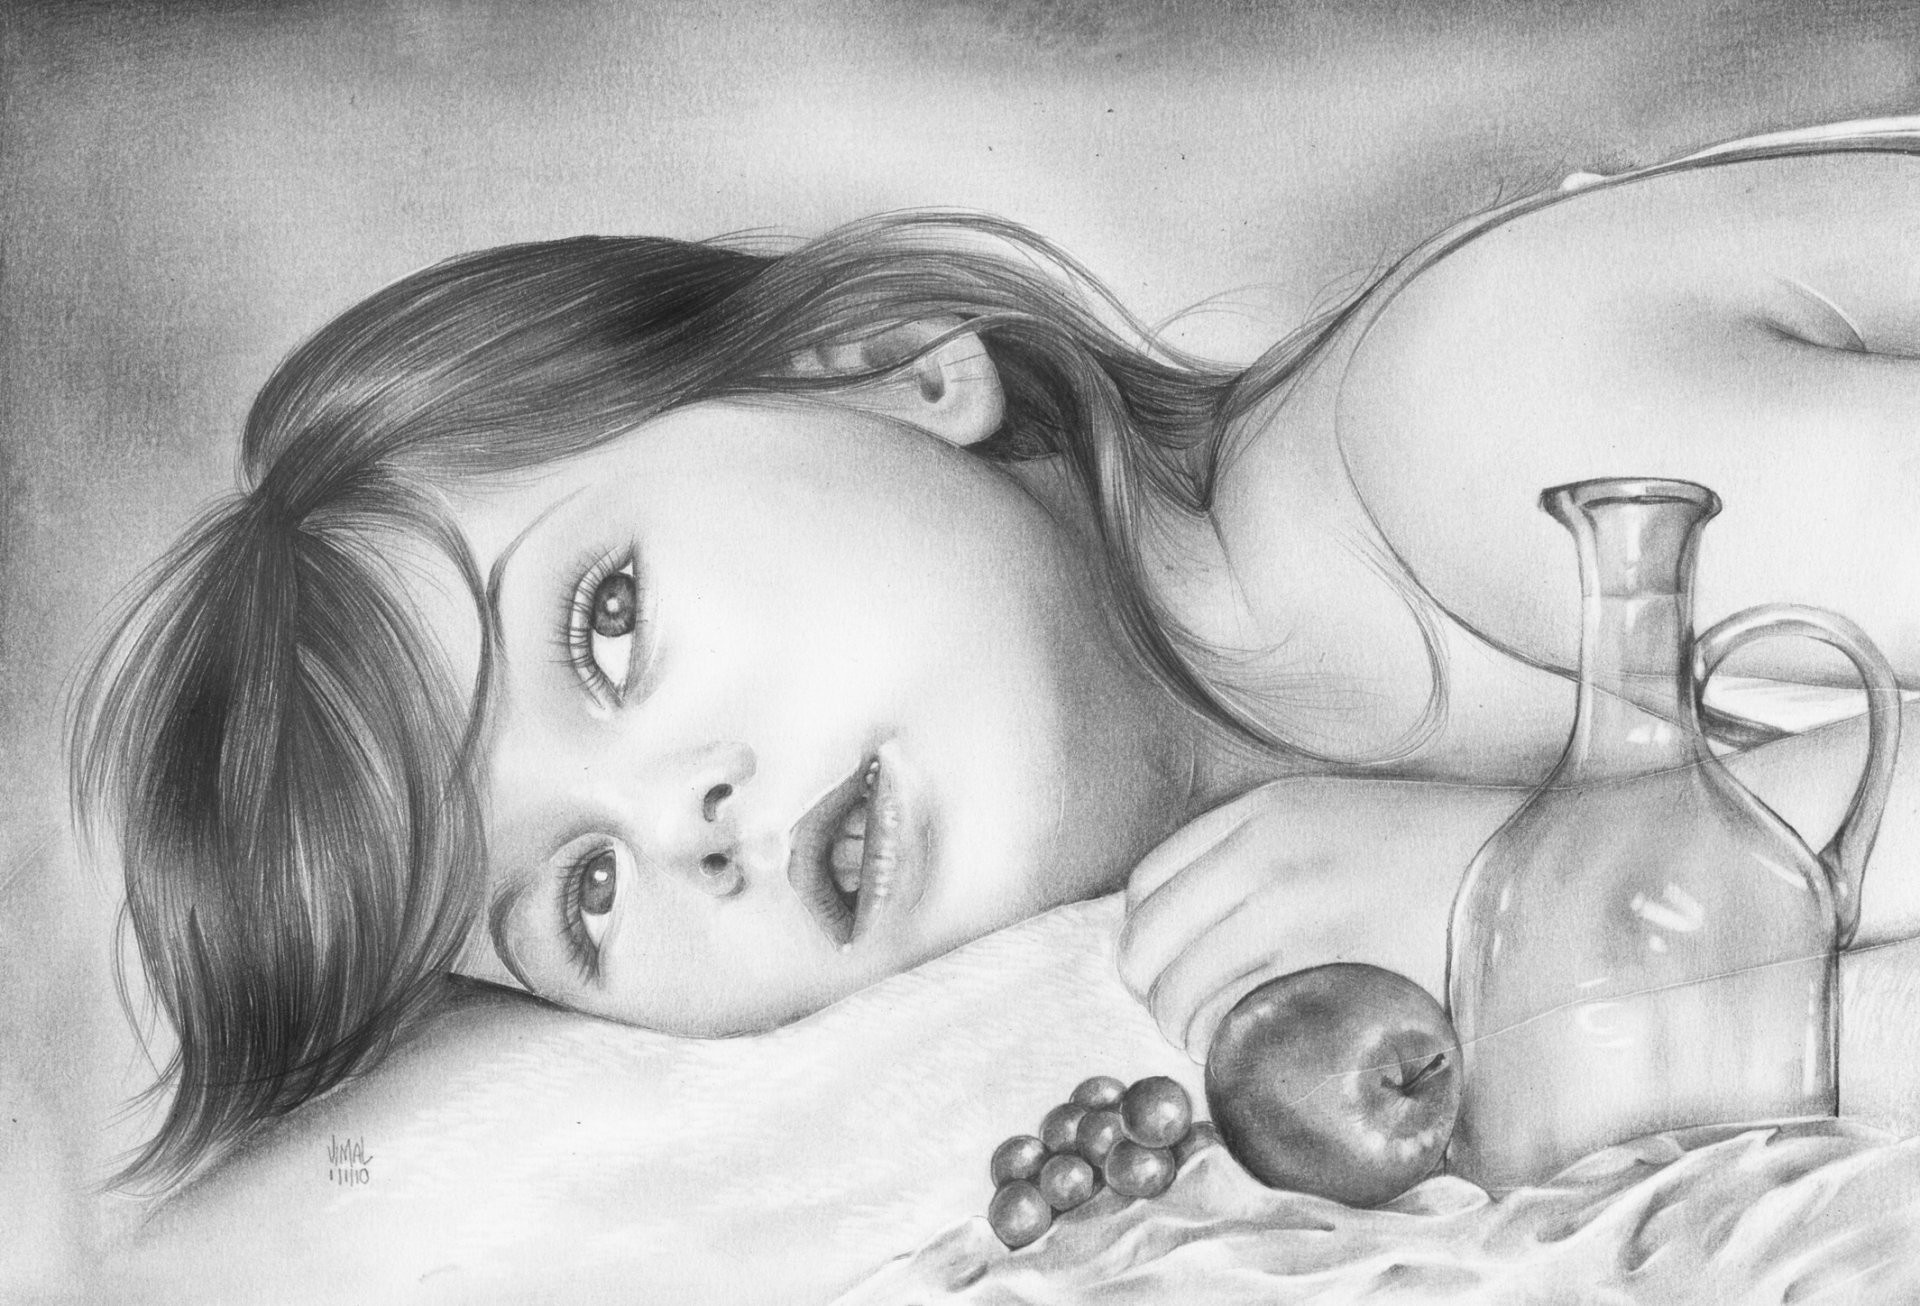 1920x1306 ... Baby Girl Sketch Hd Wallpaper Painting Pencil Child Girl Is Face View  Apple Grapes Hd Wallpaper ...